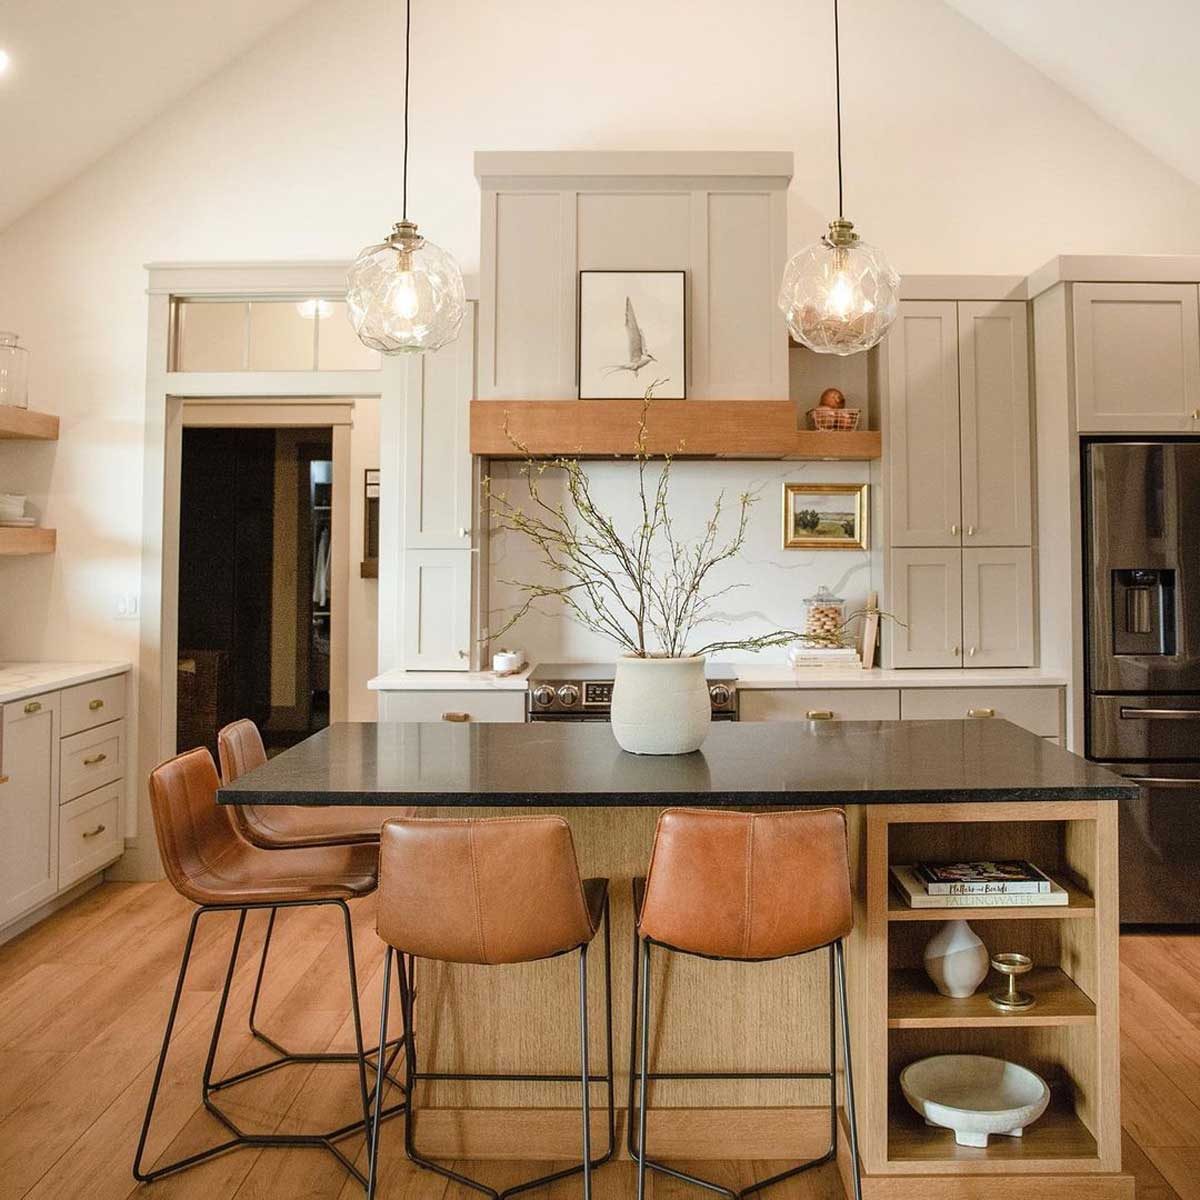 The Best Neutral Kitchen Ideas To Try Right Away